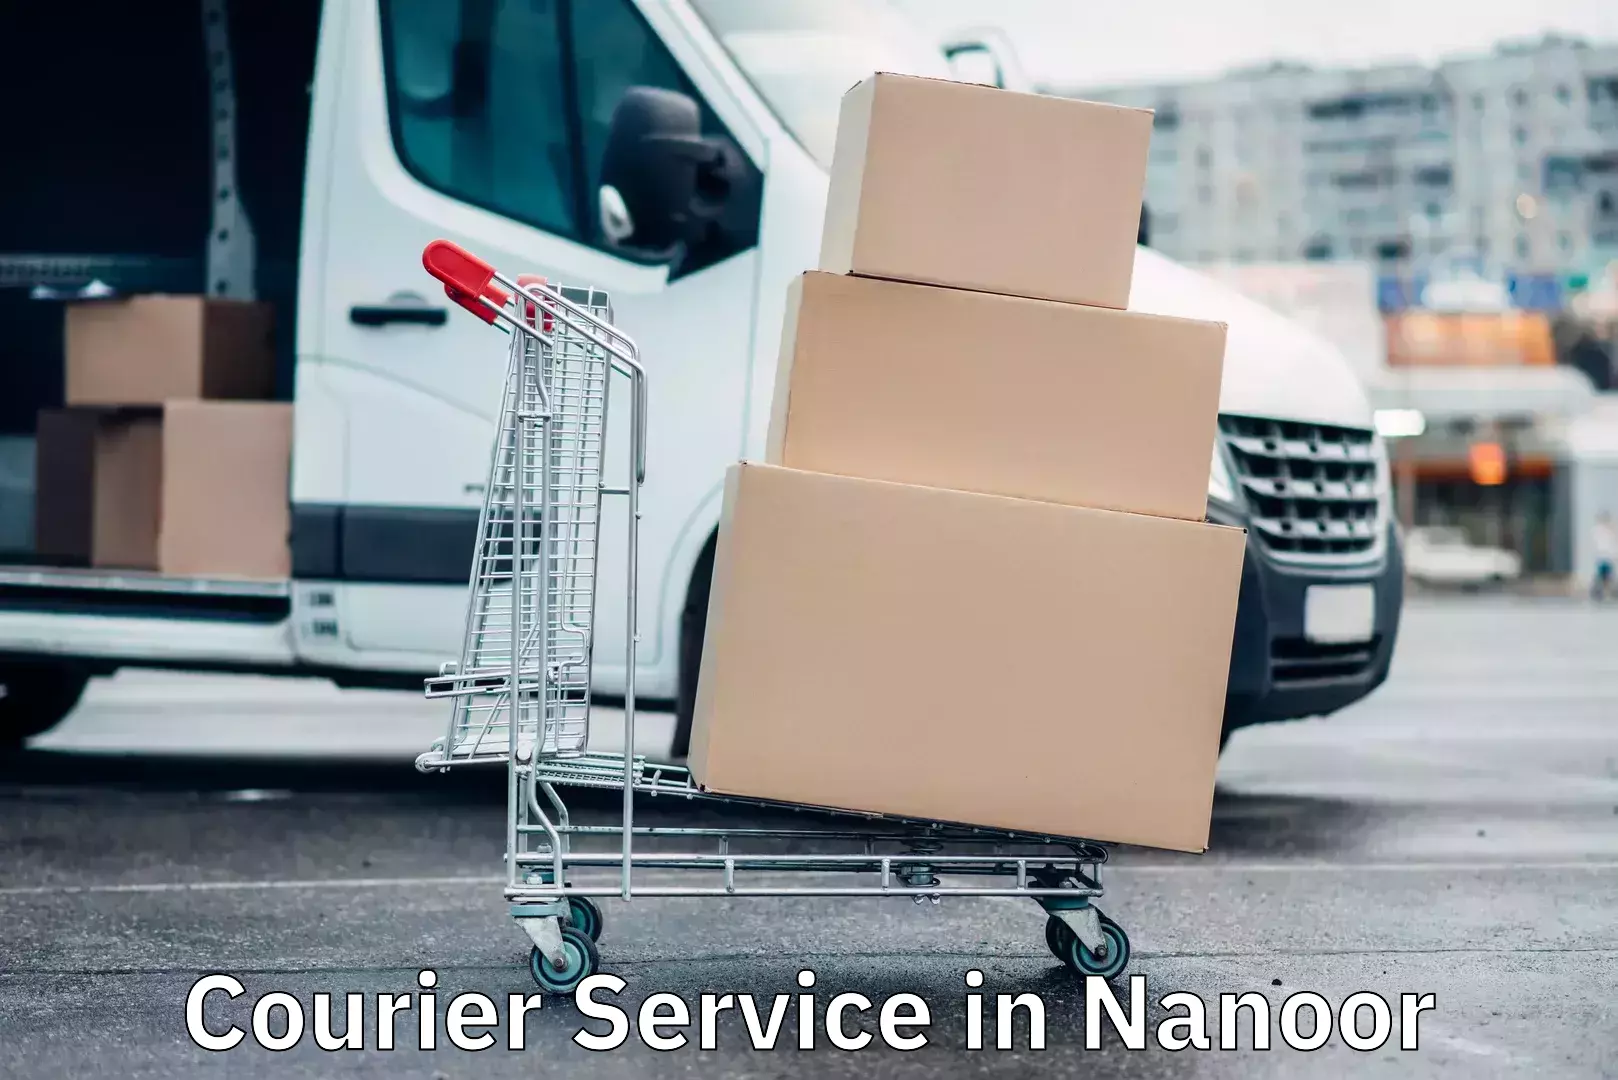 Subscription-based courier in Nanoor